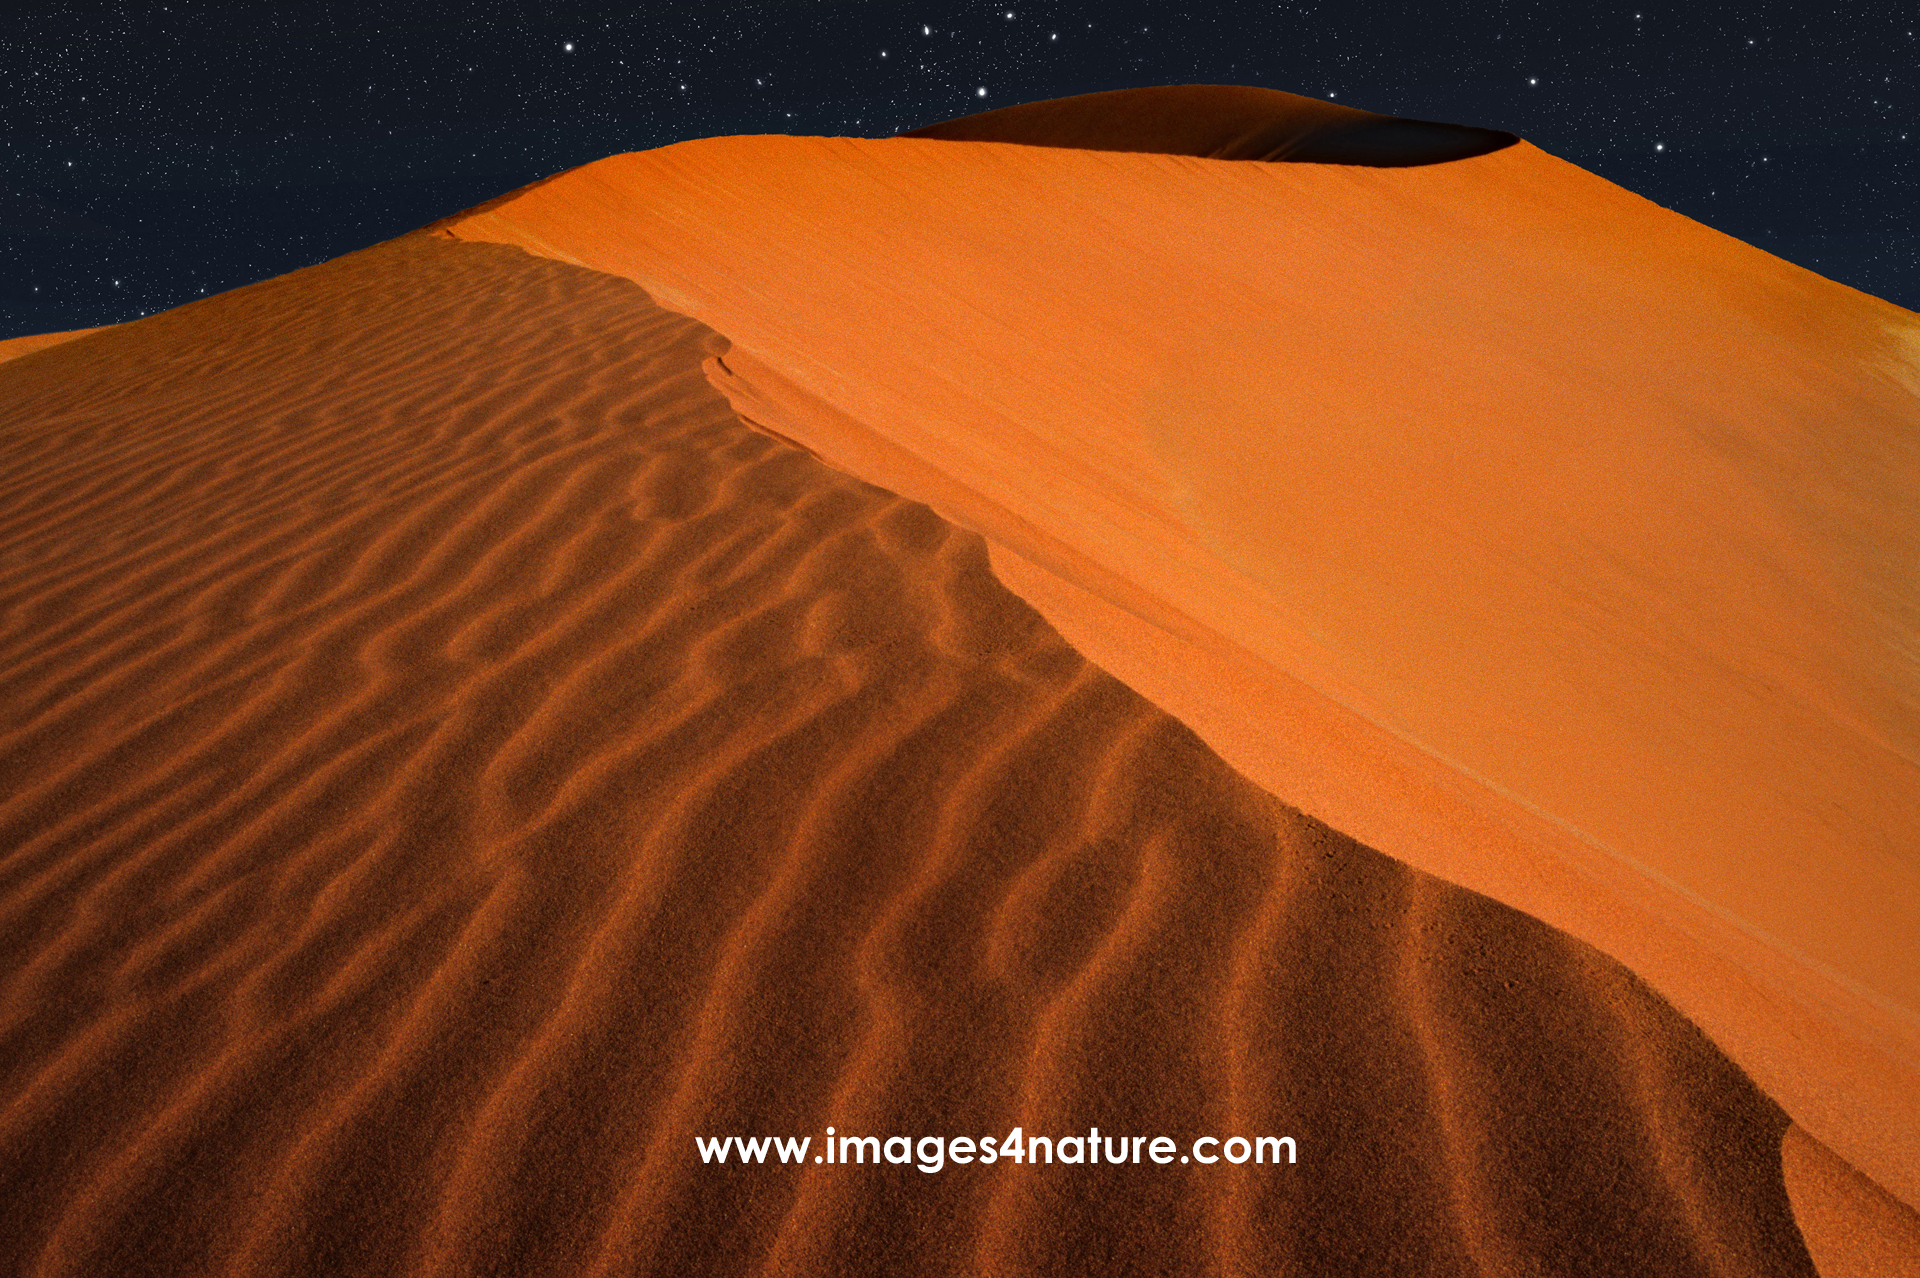 Orange Namibia sand dune with ripples against starry night sky